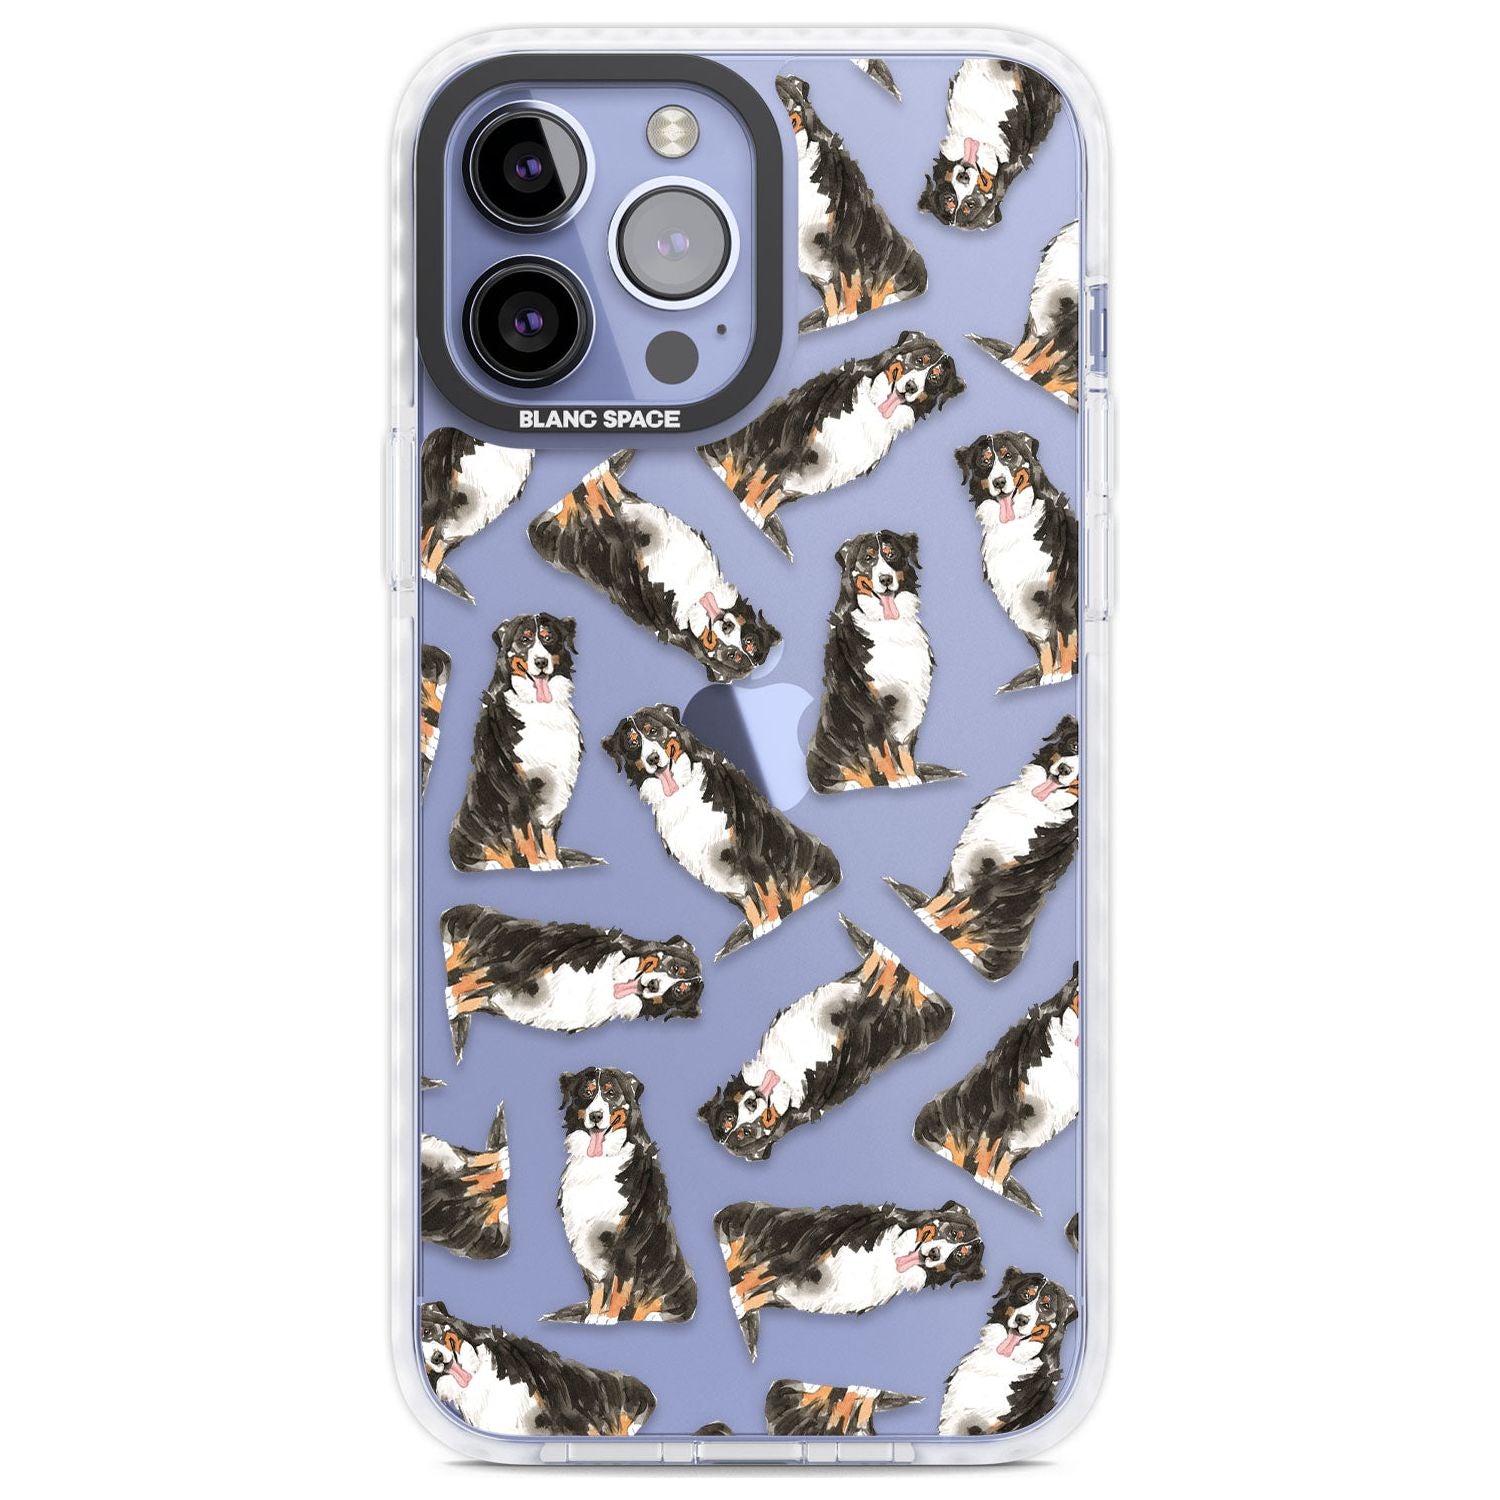 Bernese Mountain Dog Watercolour Dog Pattern Phone Case iPhone 13 Pro Max / Impact Case,iPhone 14 Pro Max / Impact Case Blanc Space